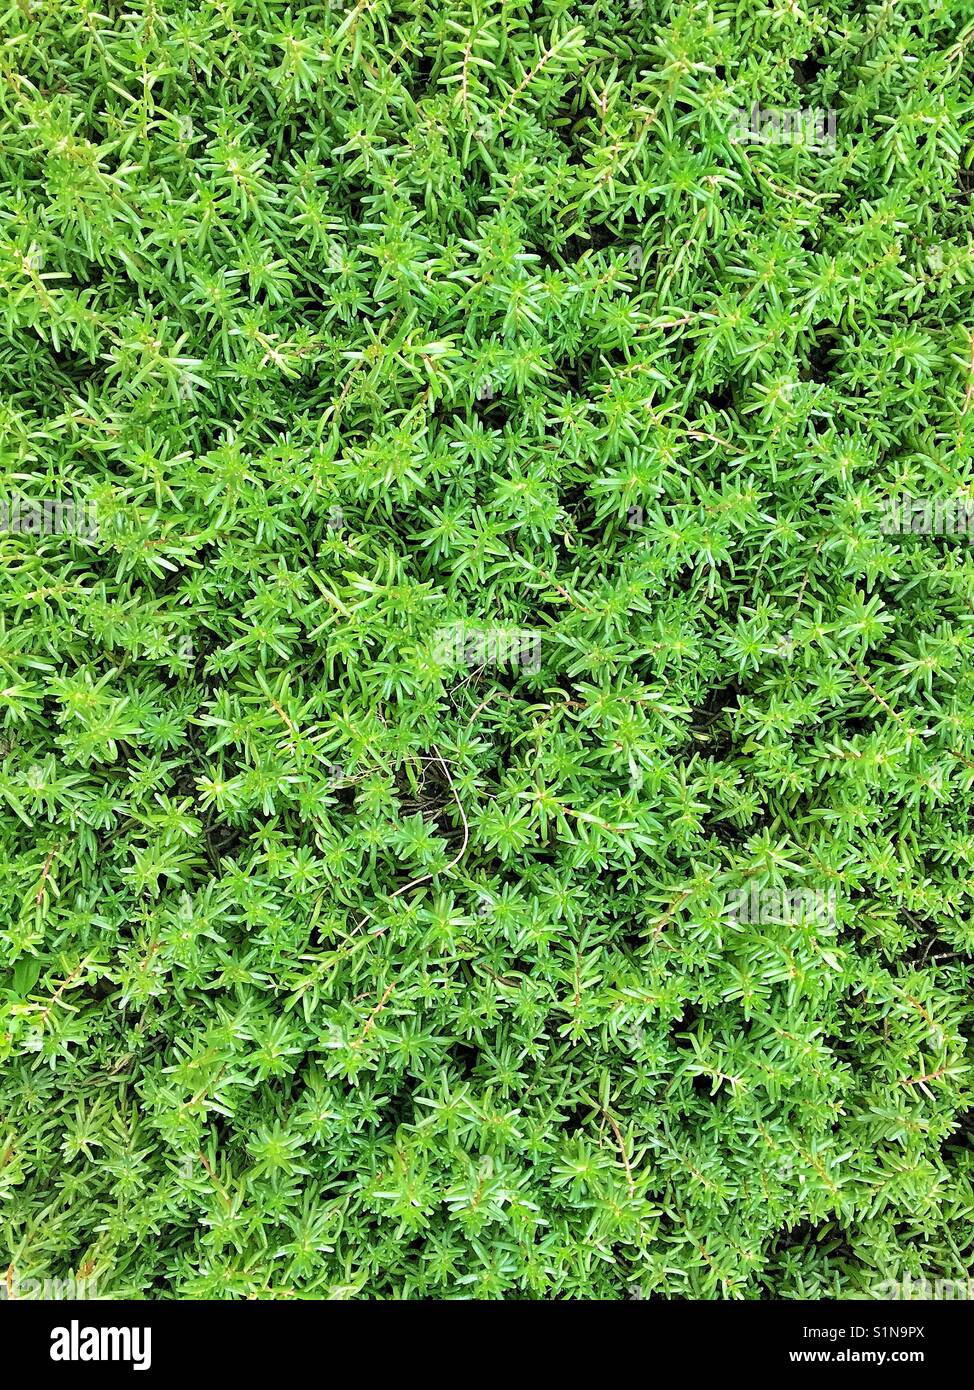 Drought tolerant ground covering plant Stock Photo